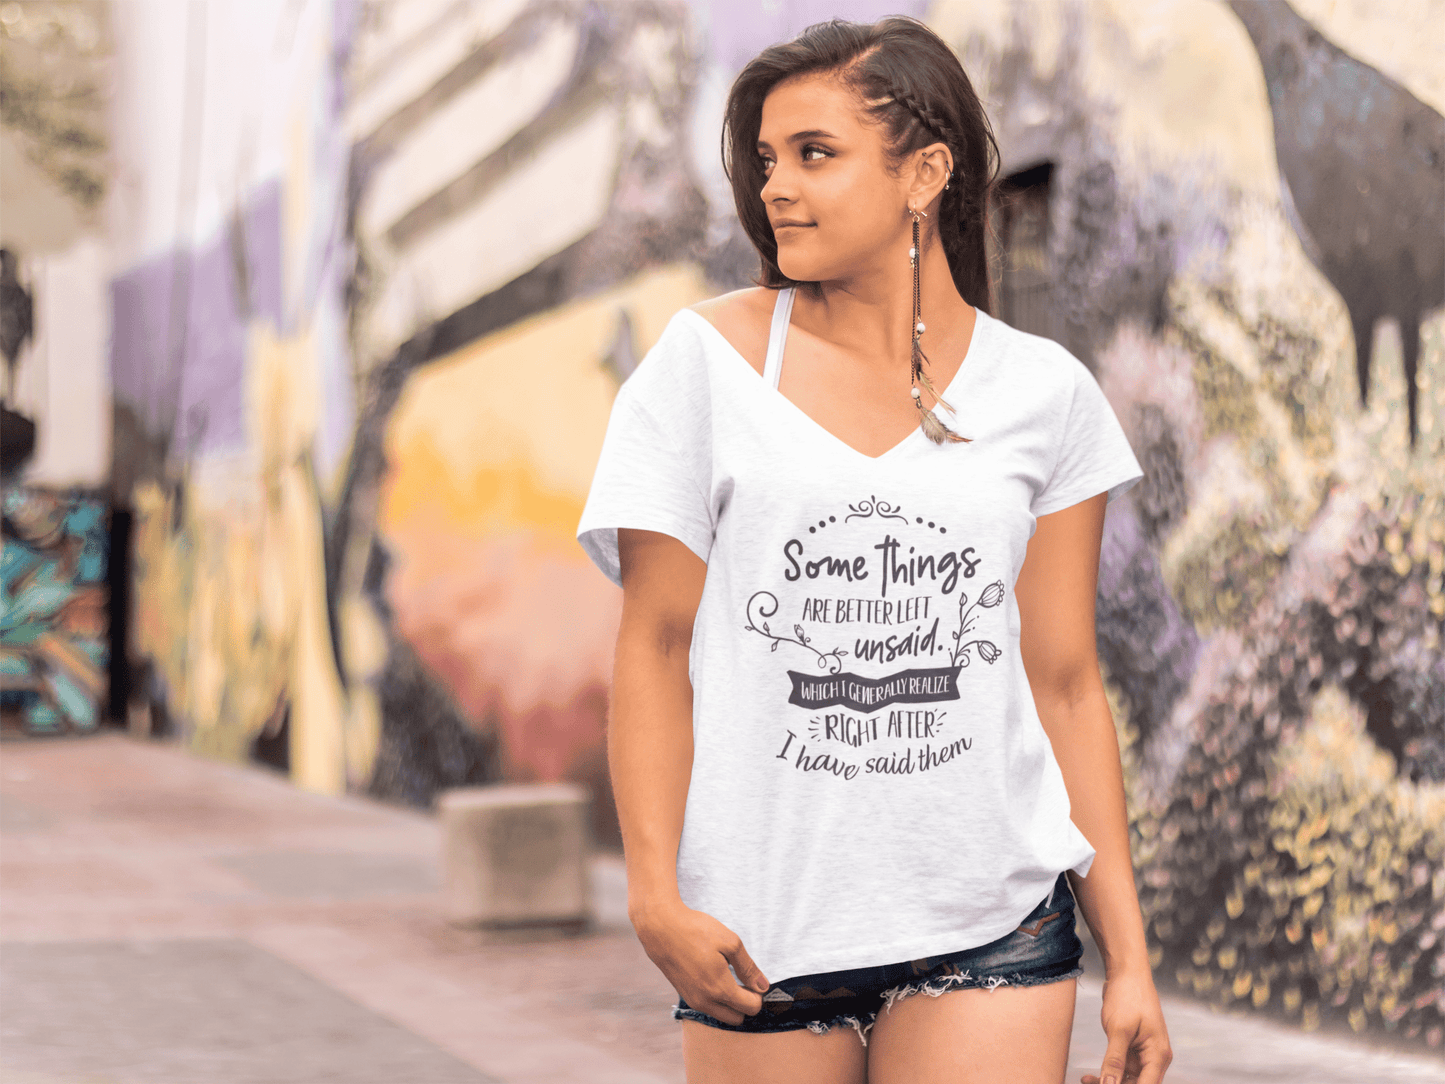 ULTRABASIC Women's T-Shirt Some Things Are Better Left Unsaid - Short Sleeve Tee Shirt Tops